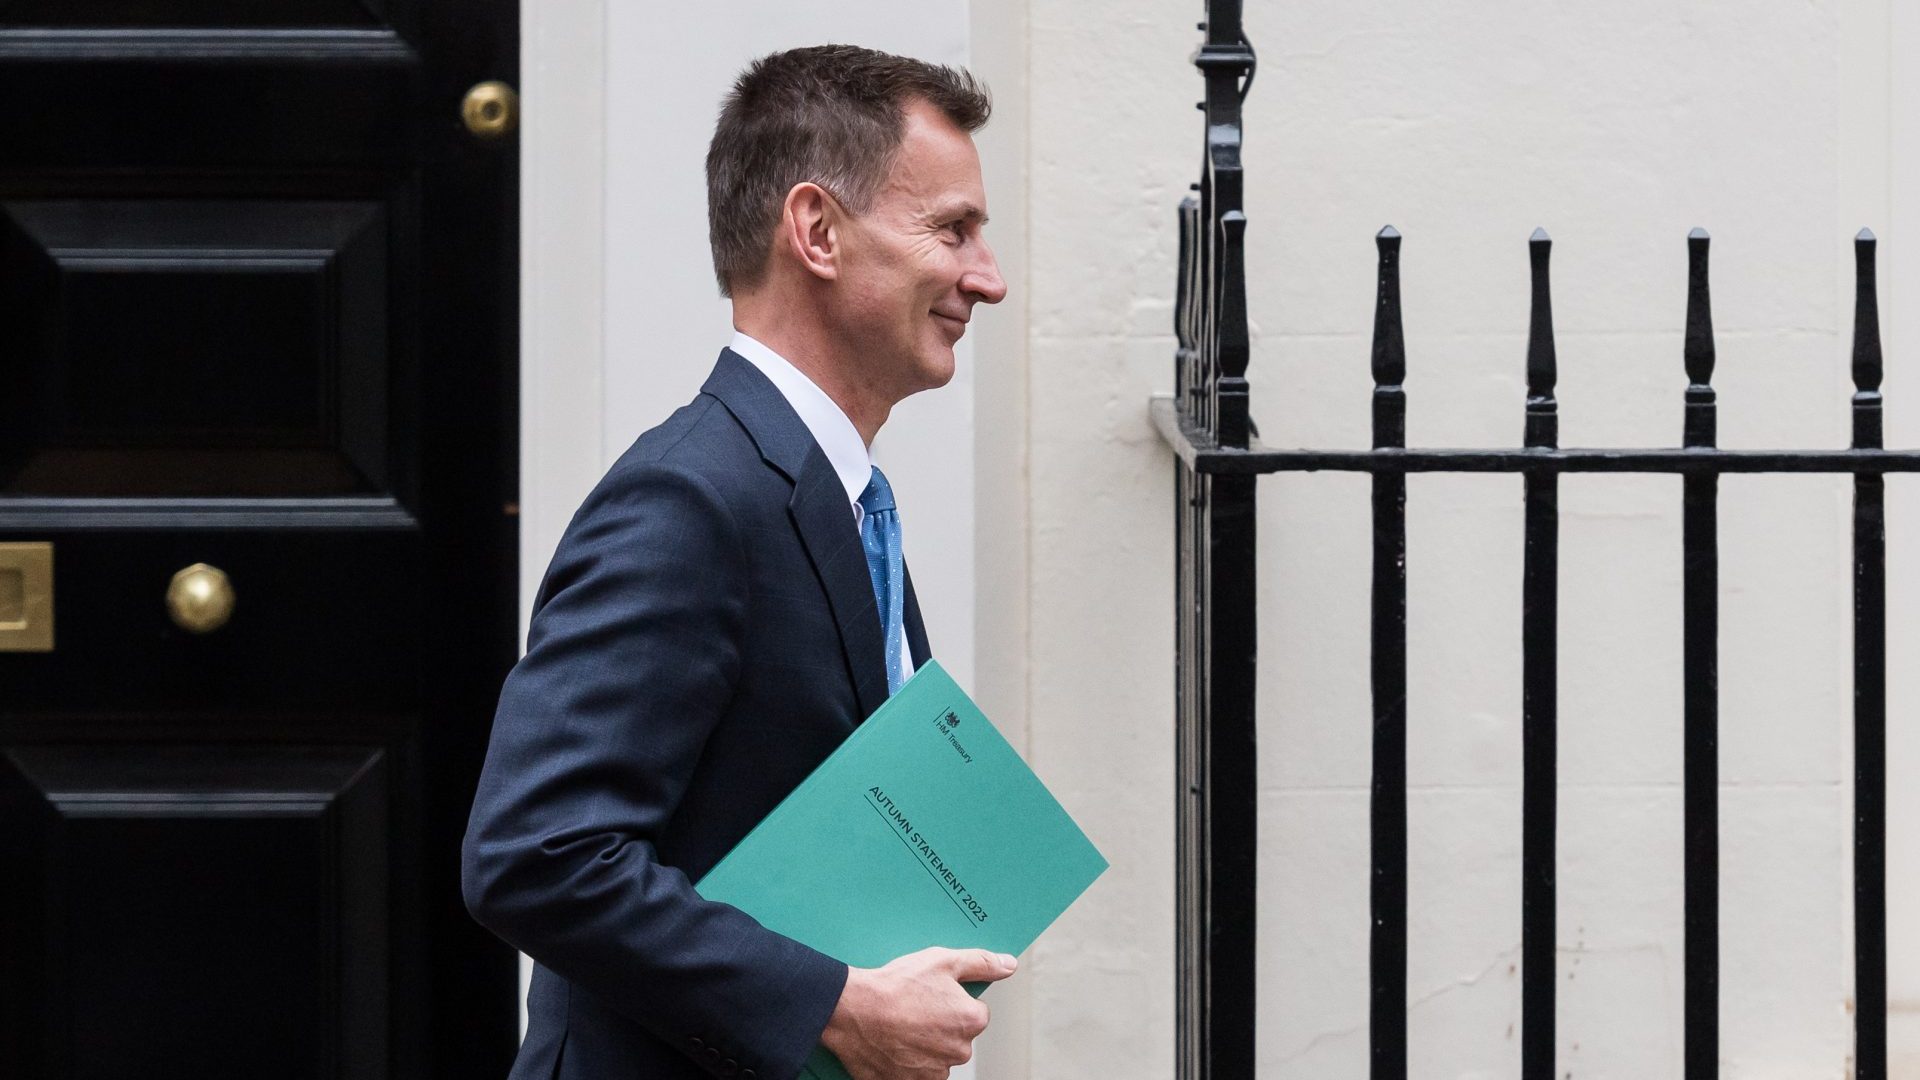 Jeremy Hunt leaves 11 Downing Street ahead of the announcement of the autumn statement (Photo by Wiktor Szymanowicz/Anadolu via Getty Images)